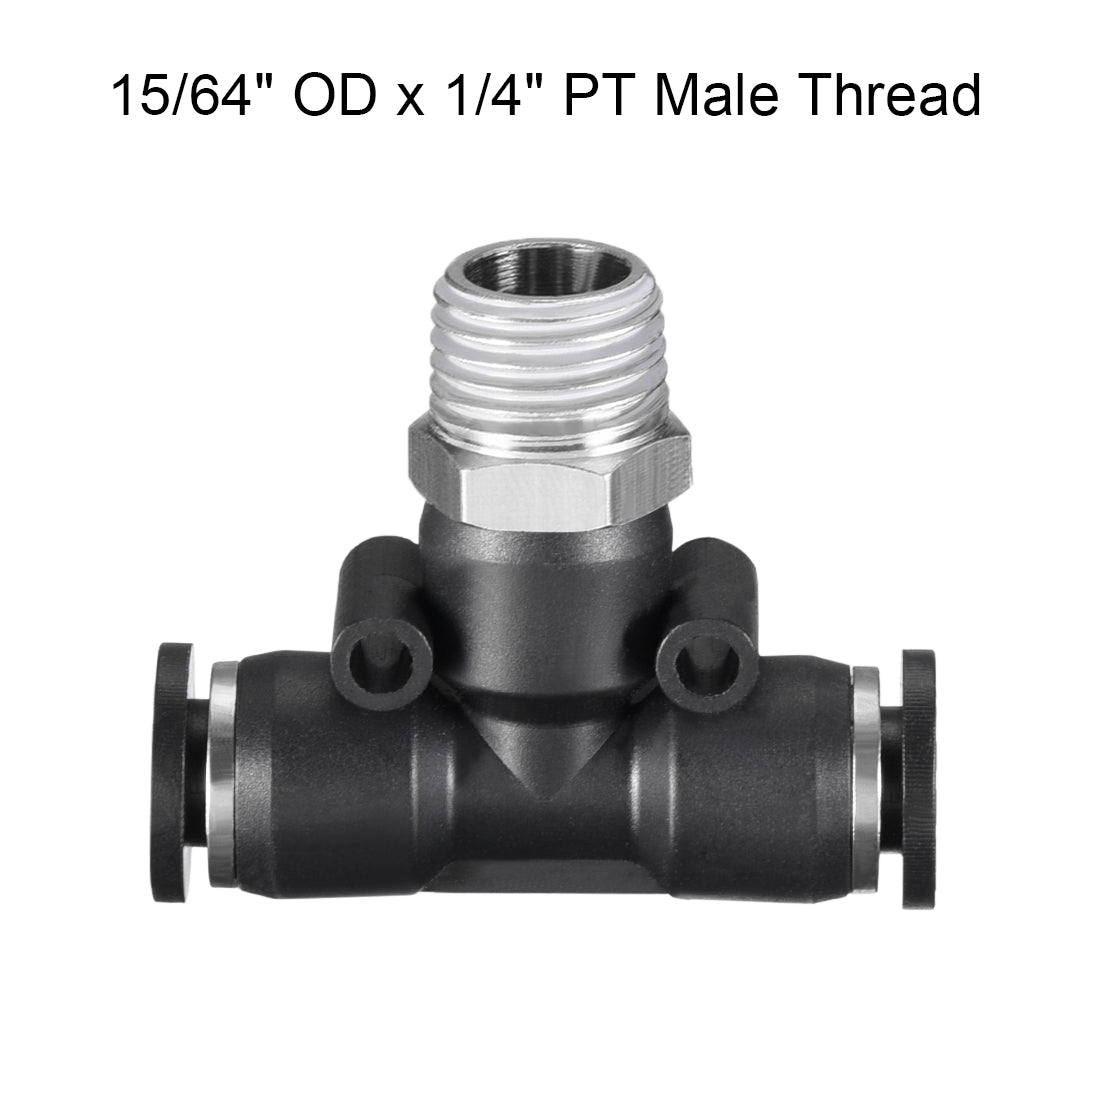 uxcell Uxcell Push to Connect Fittings T Type Thread Tee Tube Connect 15/64" OD x 1/4" PT Male Thread Push Fit Fittings Tube Fittings Push Lock